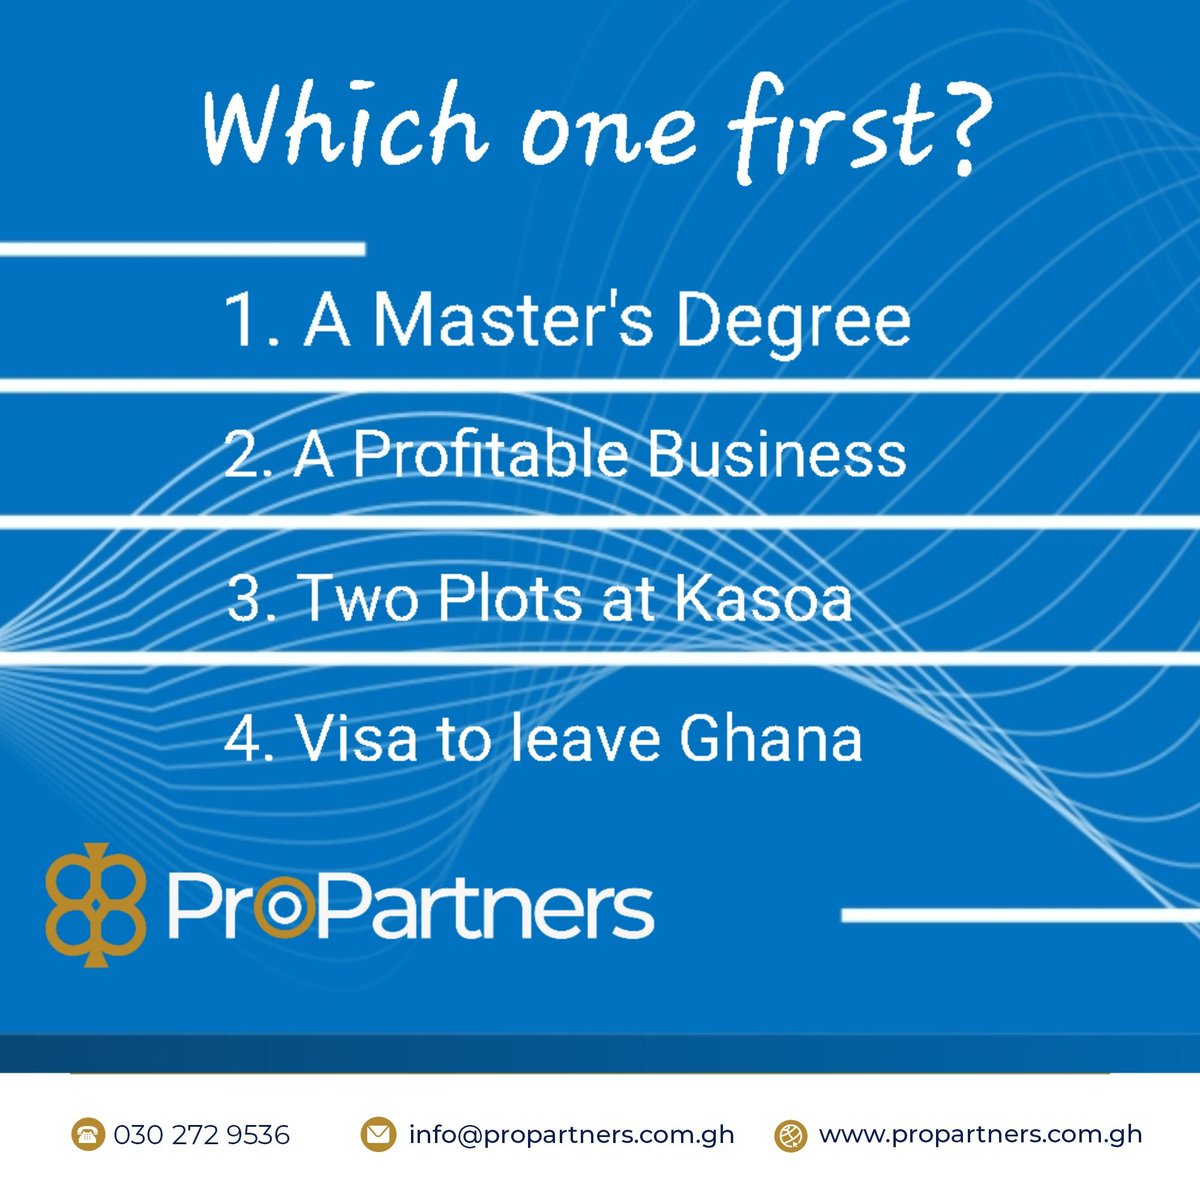 Which one will be your first? 

#HappyWeekend 
#WeekendVibes 
#propartnersexchange 
#propartnersghana 
#alternativeinvestment 
#alternativecapital 
#partnership 
#crowdfunding